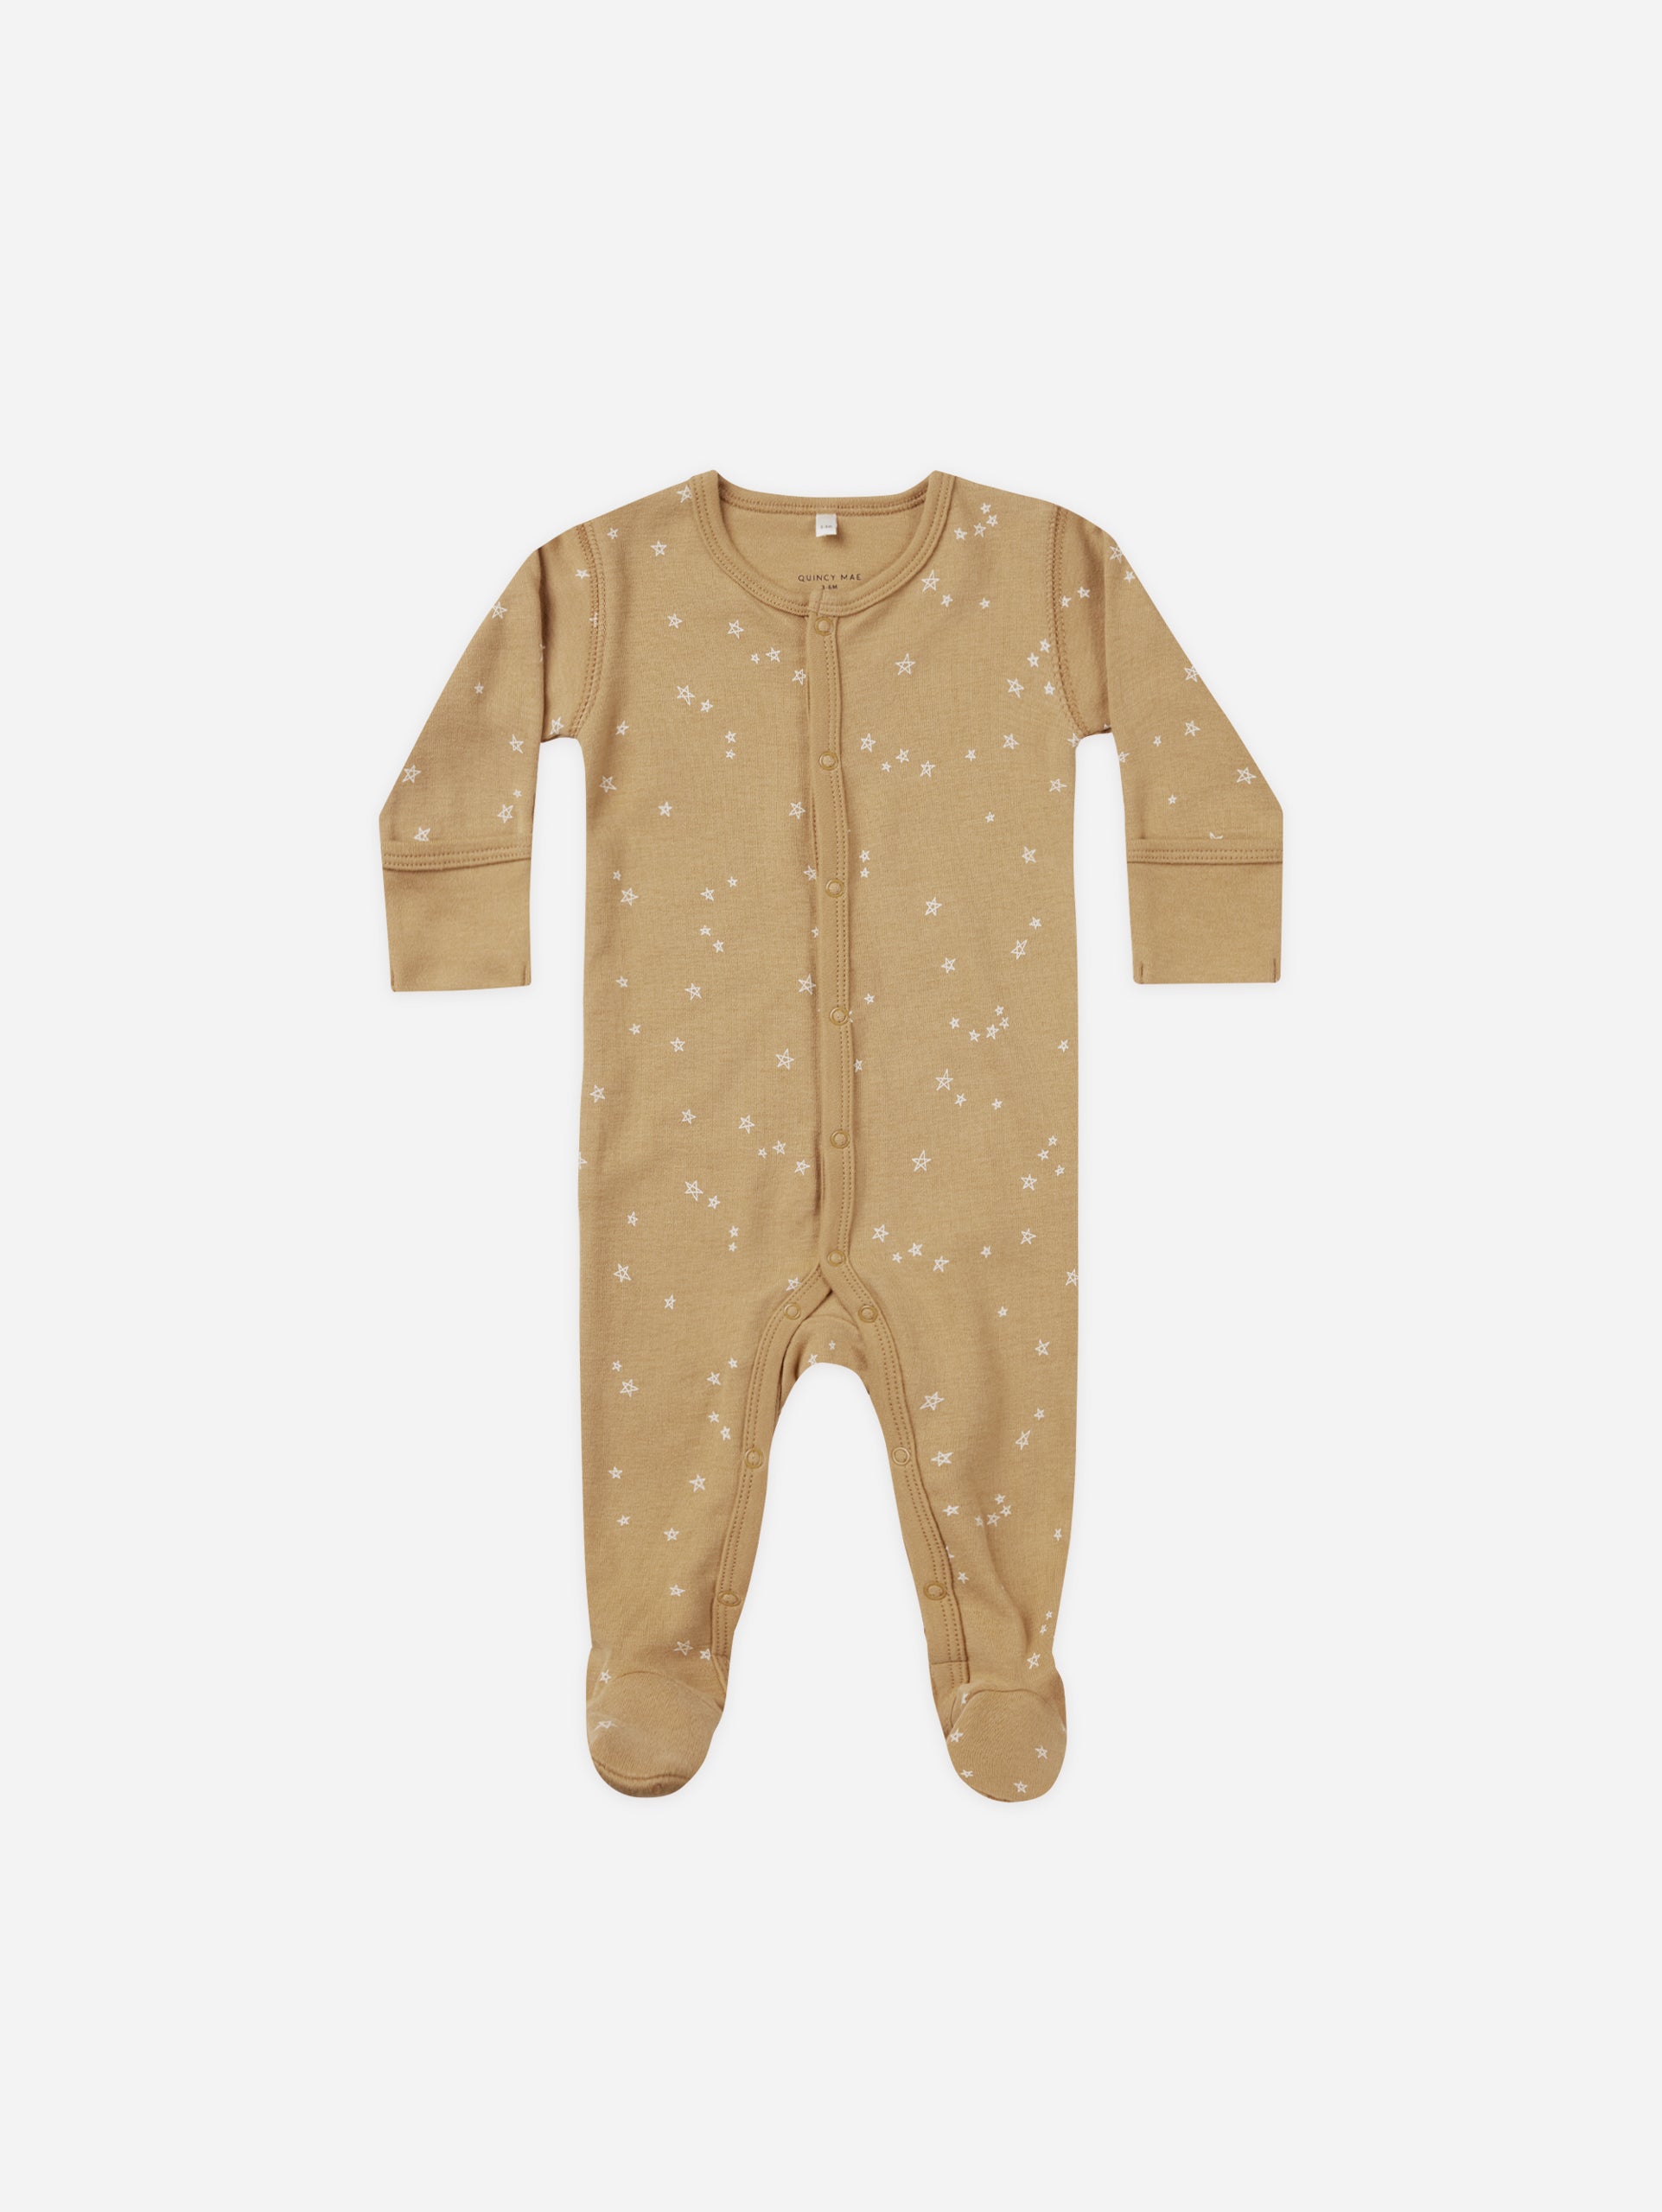 Full Snap Footie || Stars - Rylee + Cru | Kids Clothes | Trendy Baby Clothes | Modern Infant Outfits |